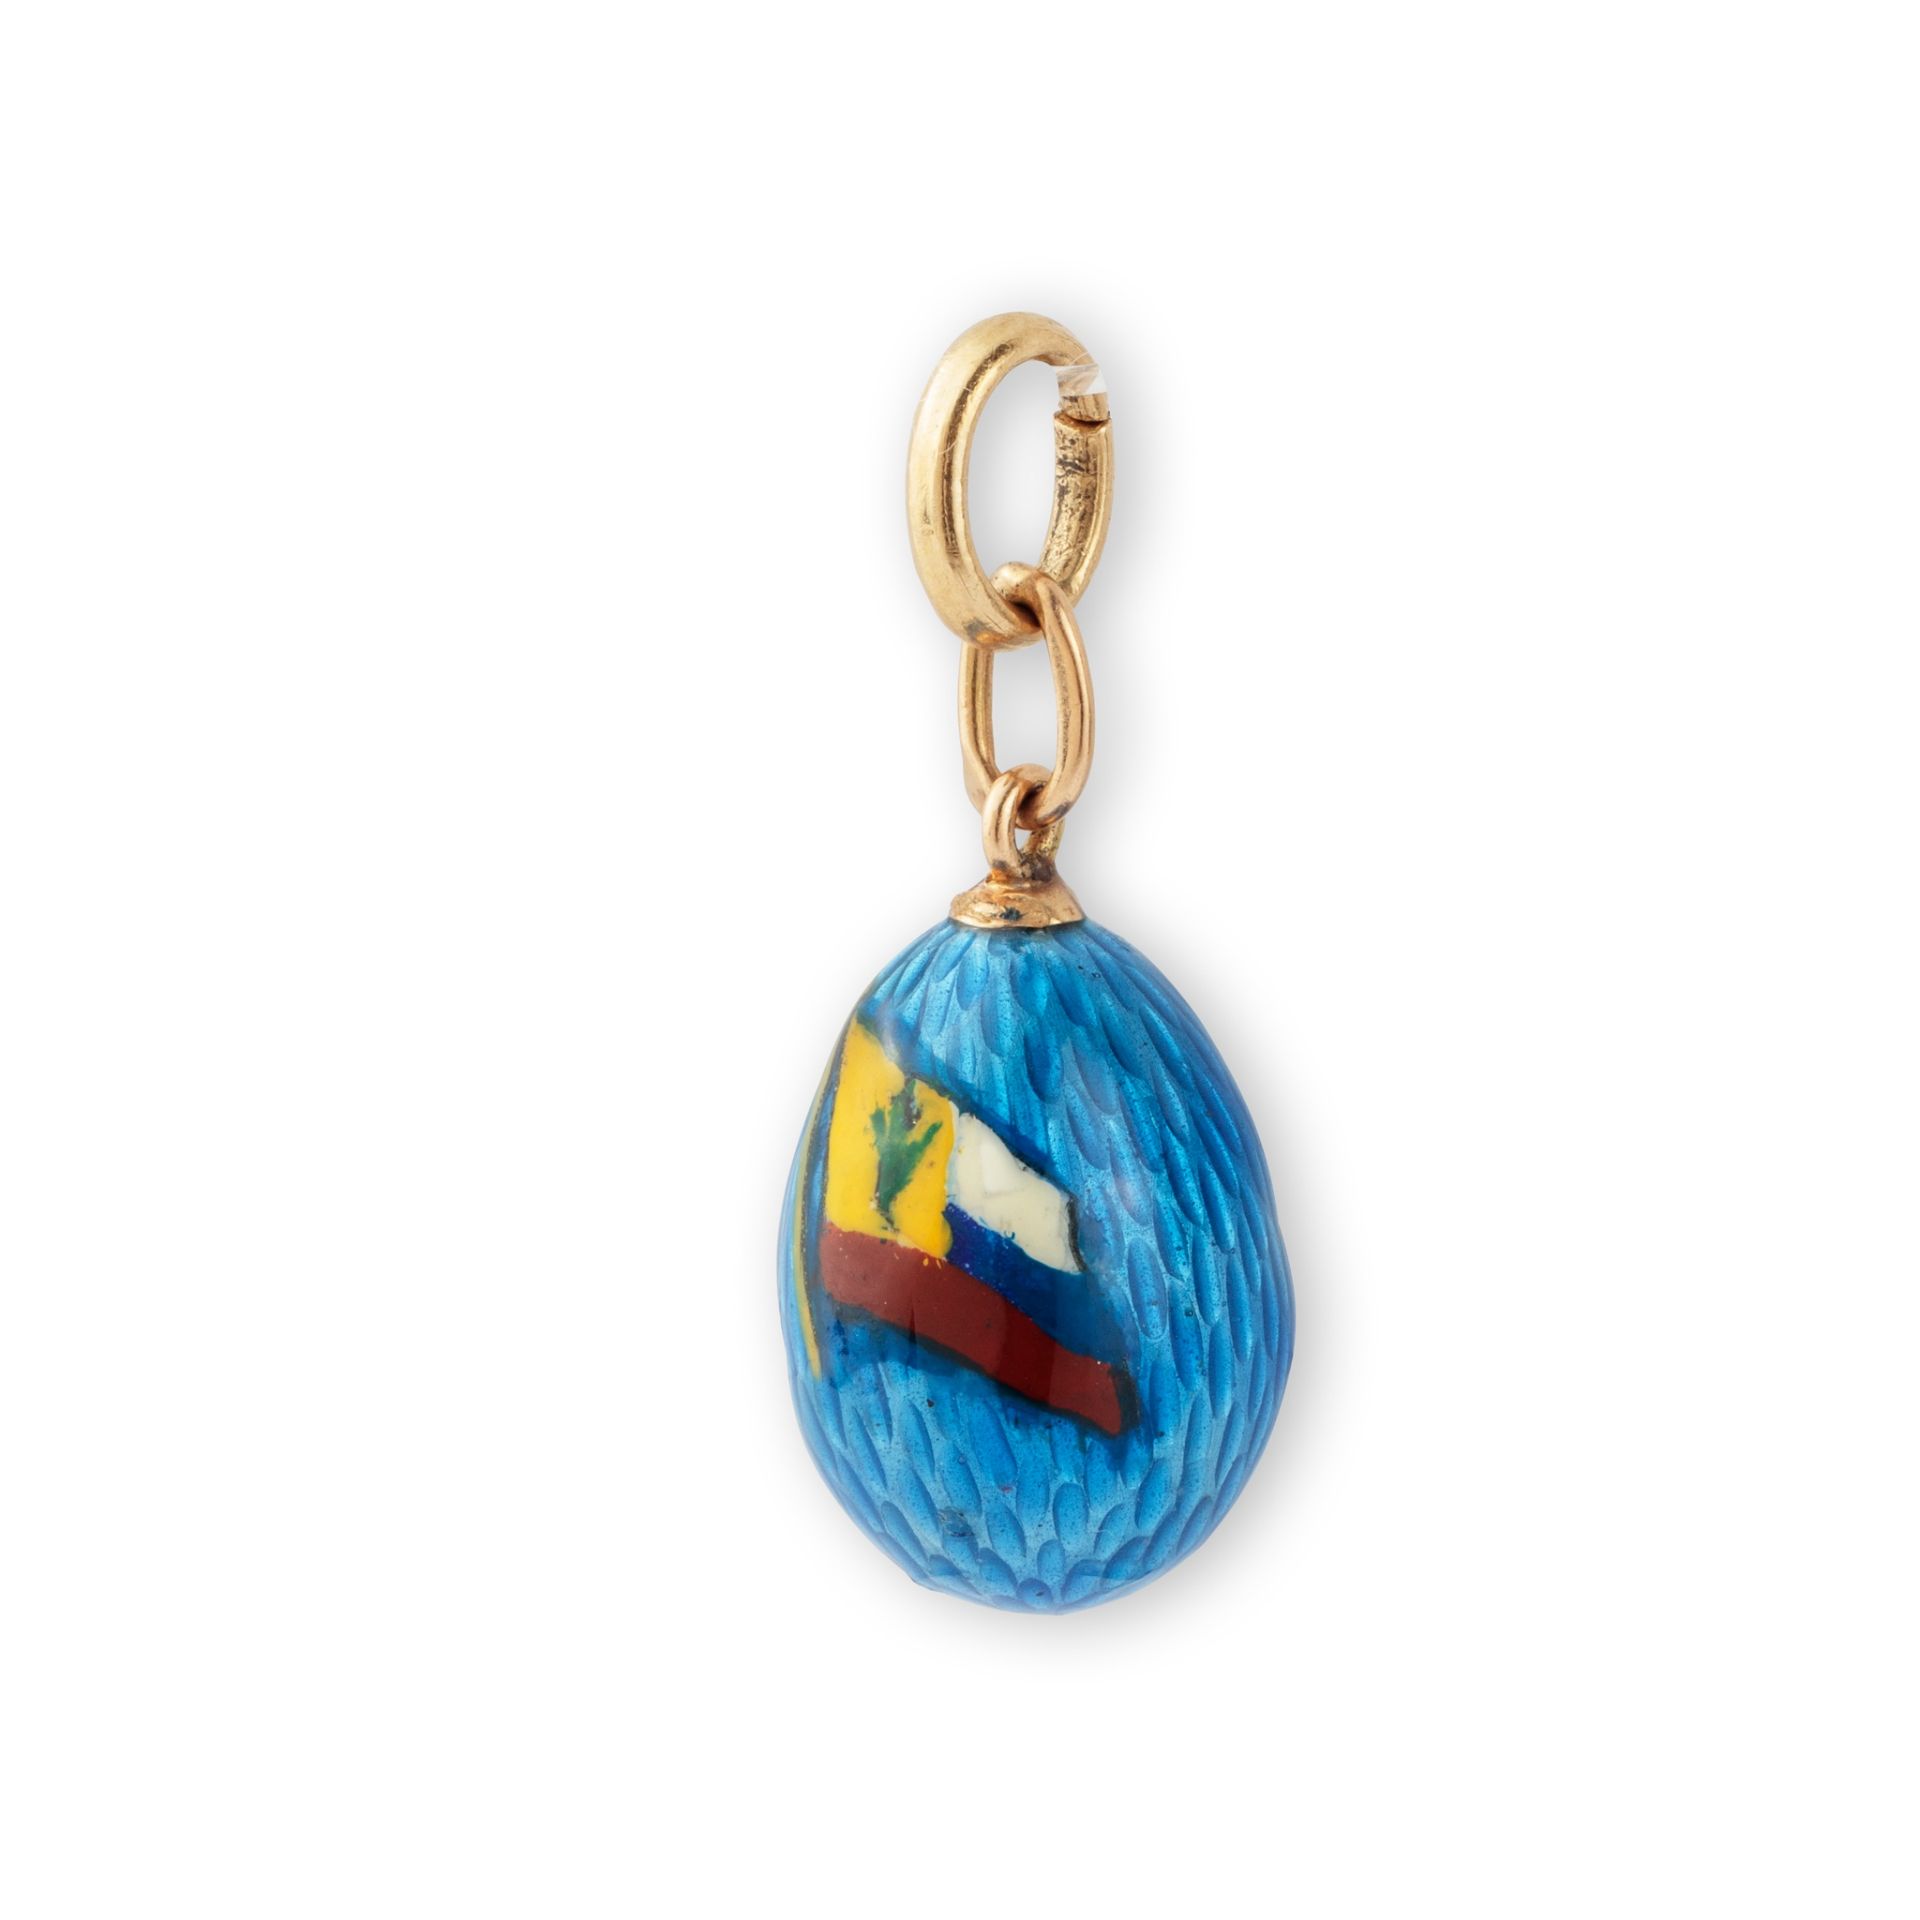 An early 20th century Russian enamelled egg pendant, circa 1914-17 Enamelled in light blue guilloché